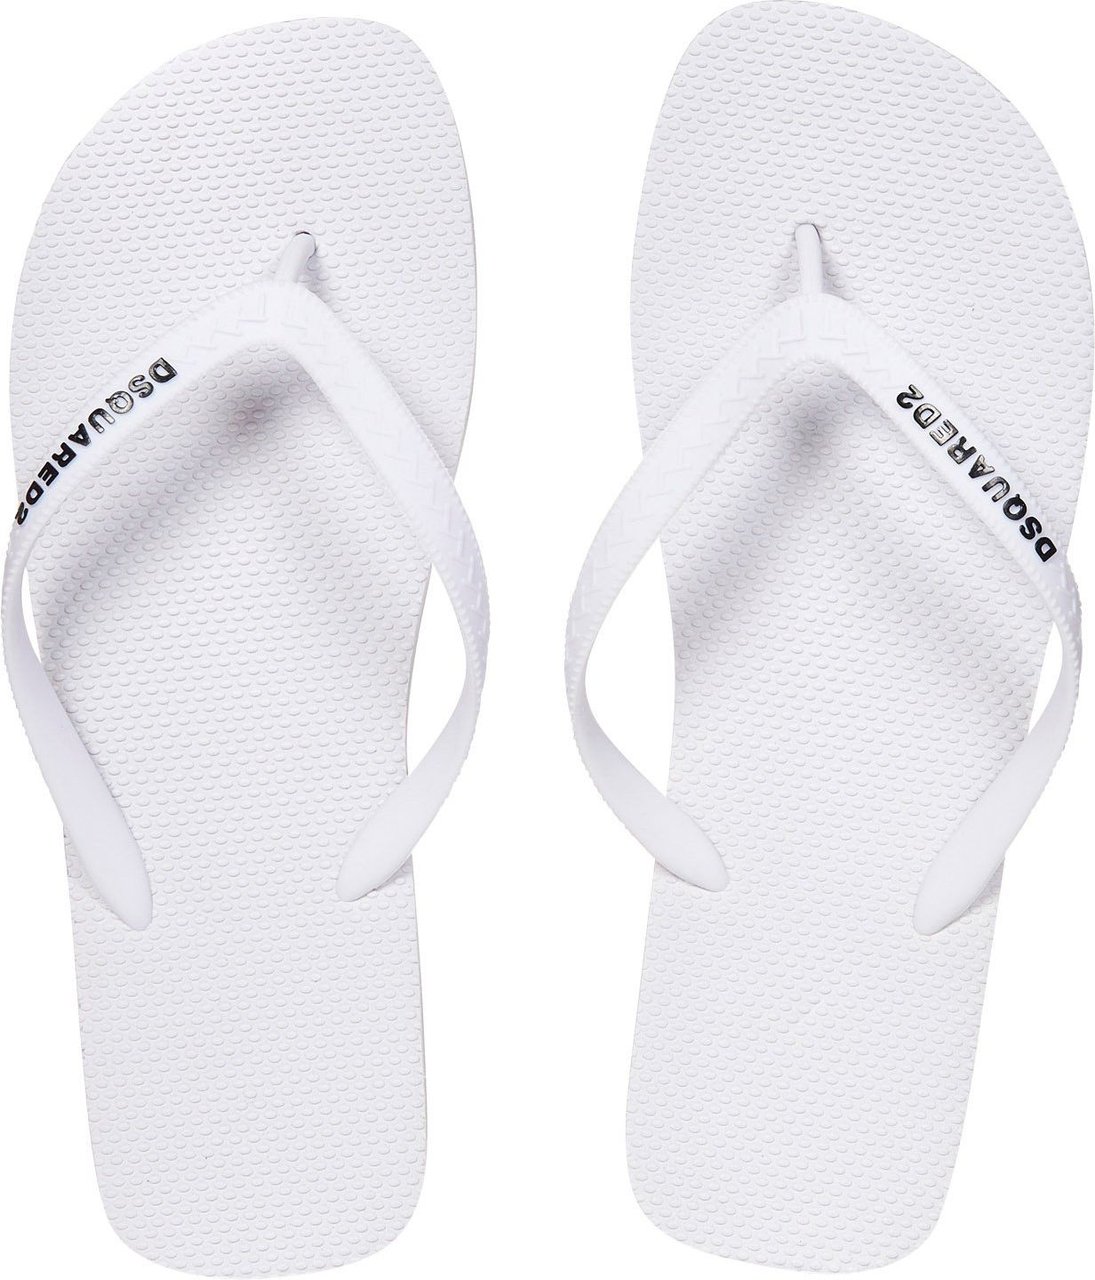 Dsquared2 White Flip Flops With Logo White Wit